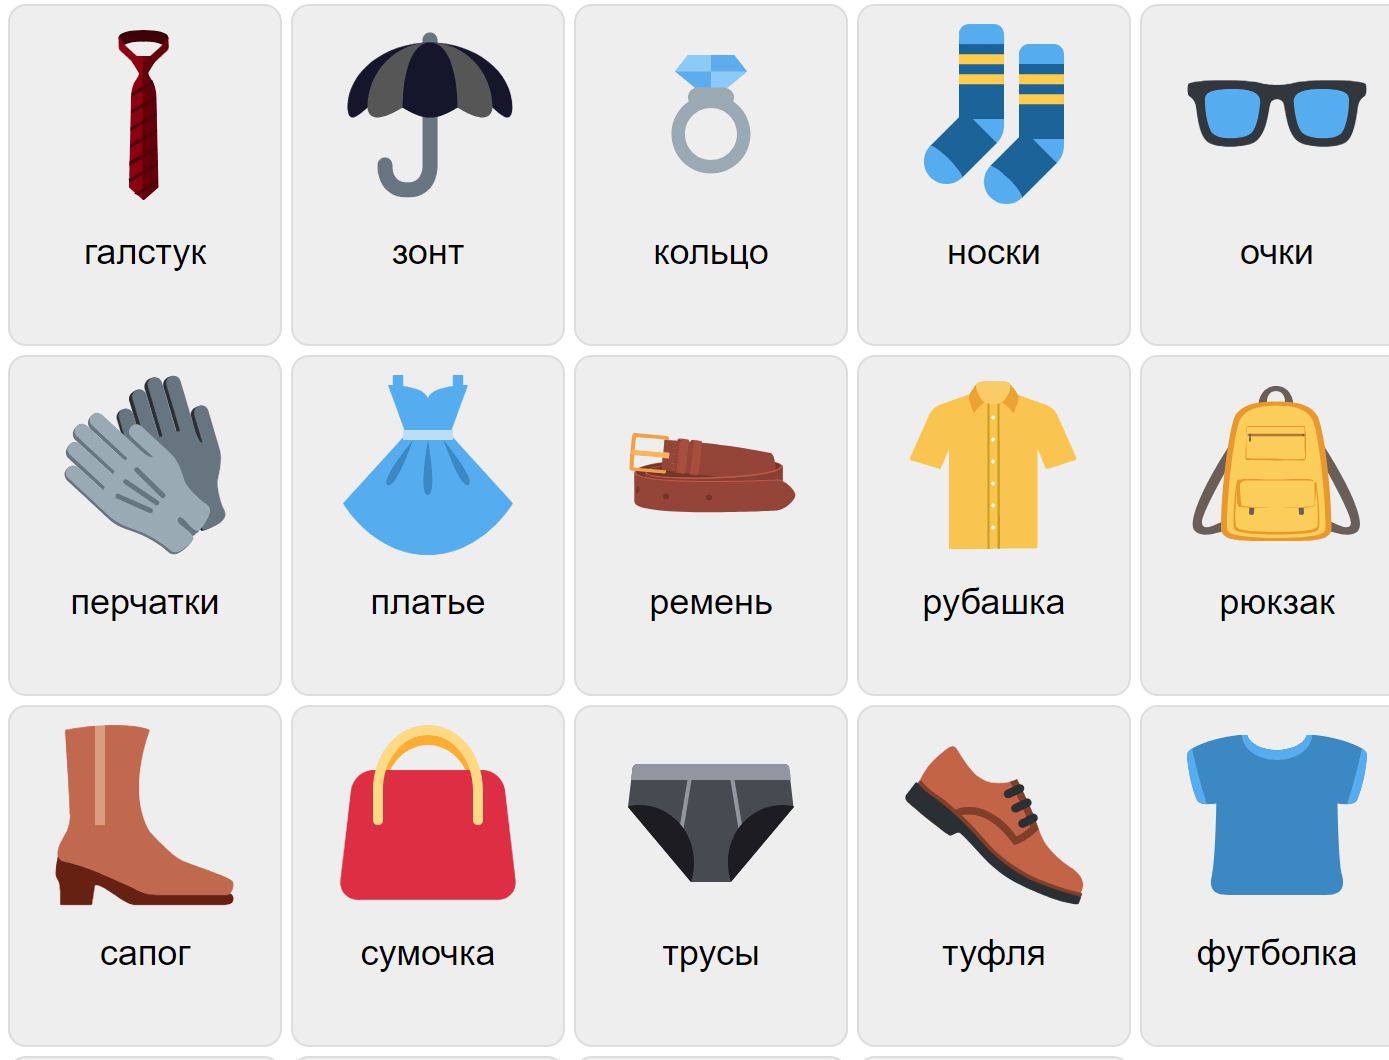 Clothes in Russian